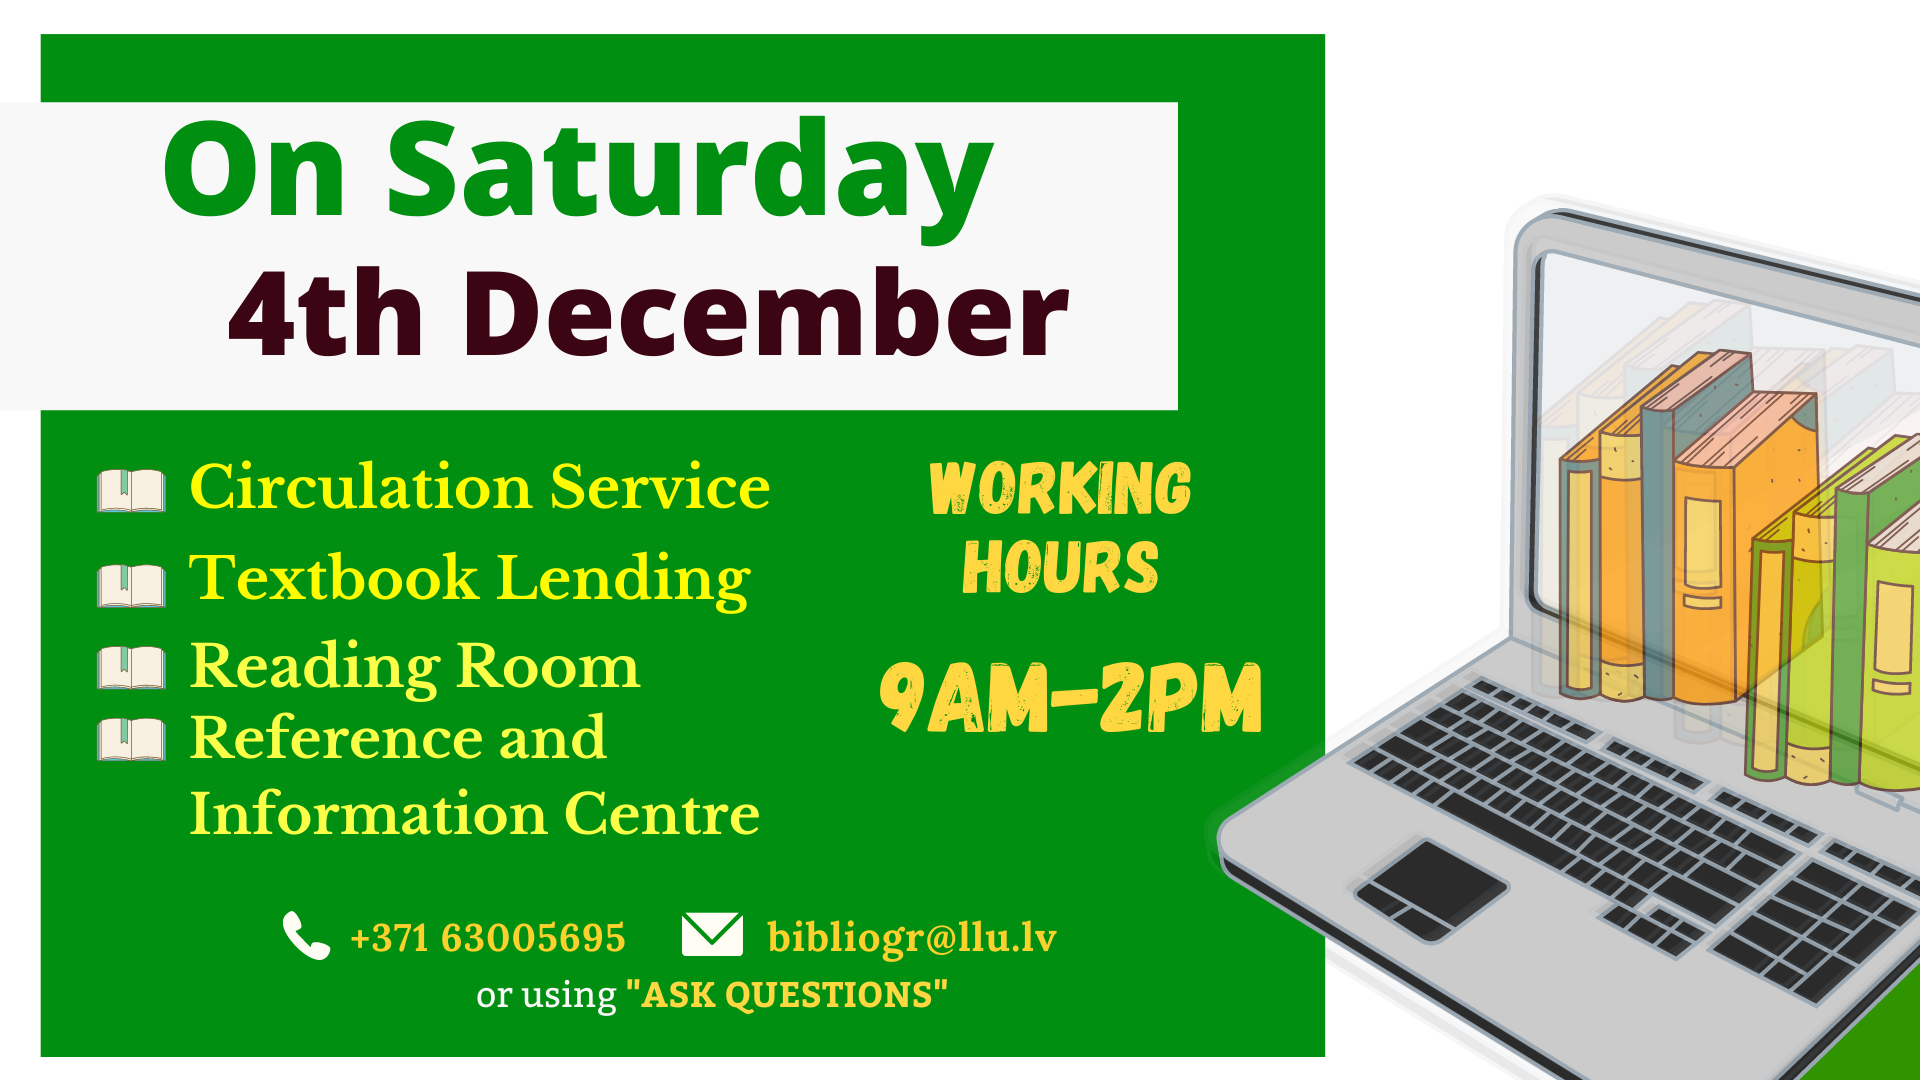 On Saturday 4 December library is open from 9am until 2pm